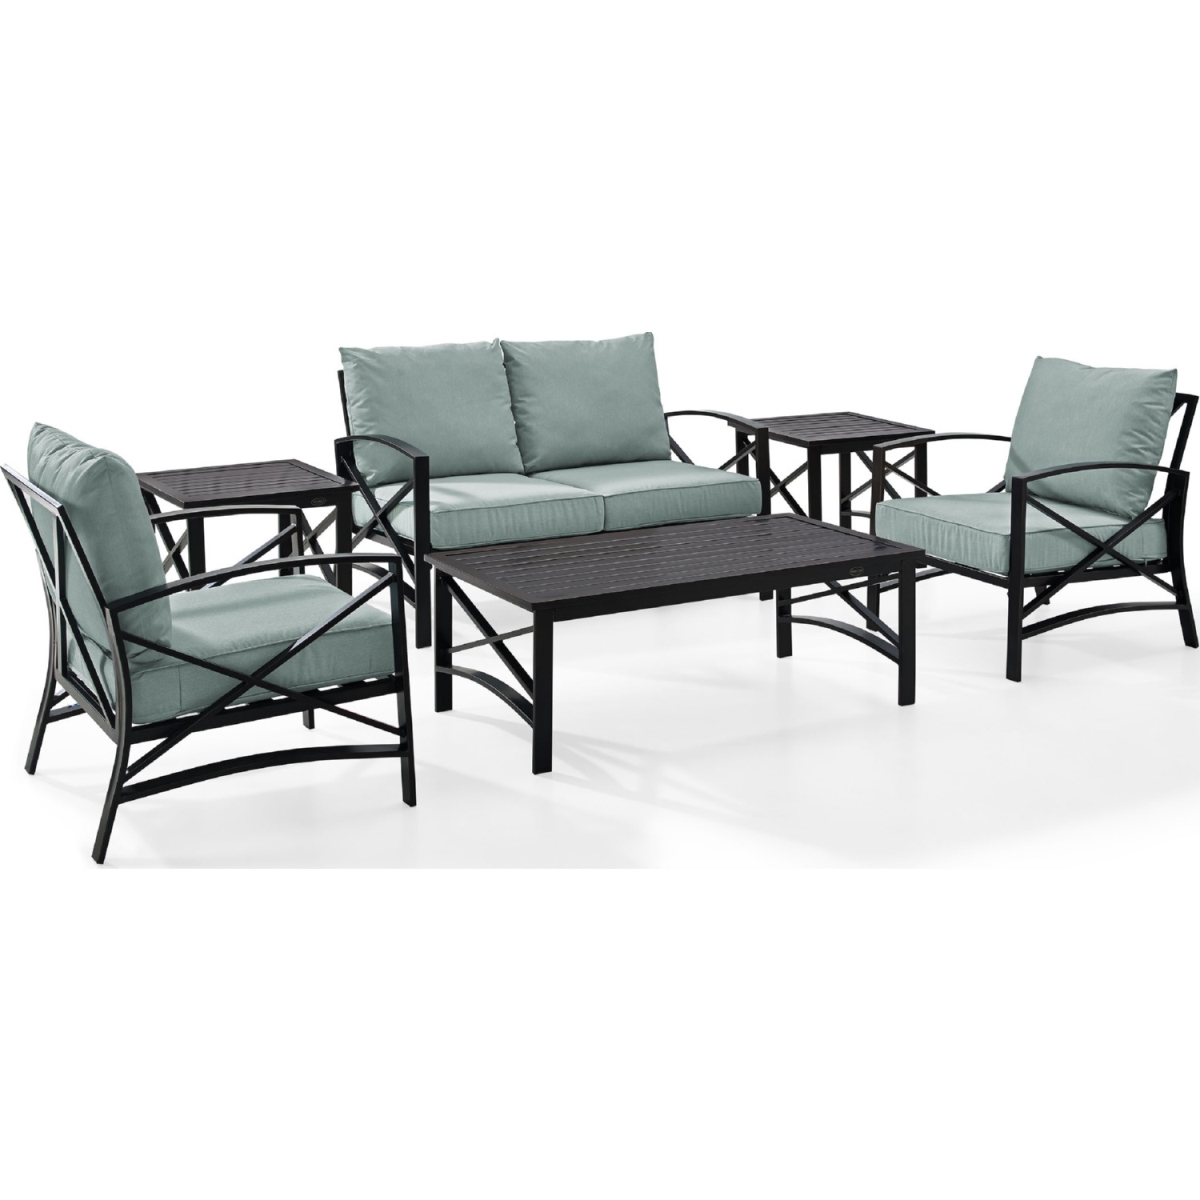 6 Piece Kaplan Outdoor Seating Set With Mist Cushion - Loveseat, Two Chairs, Two Side Tables, Coffee Table